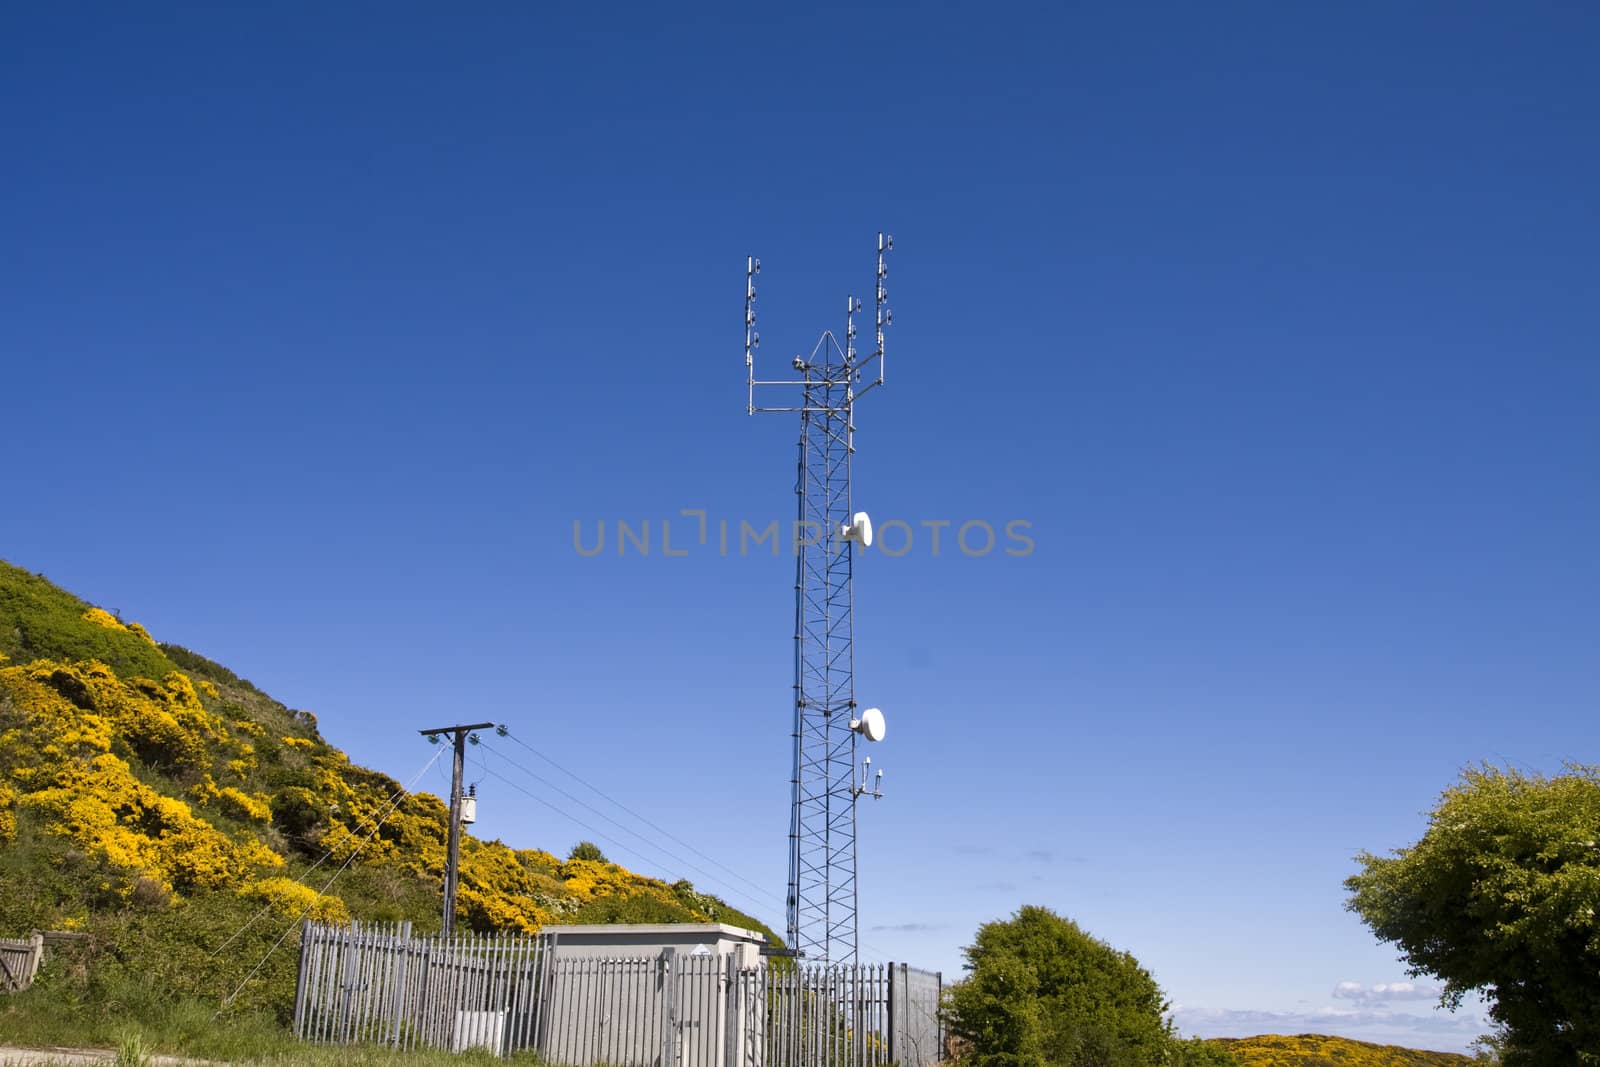 Telecommunication mast for mobile phone networks in an area of natural beauty